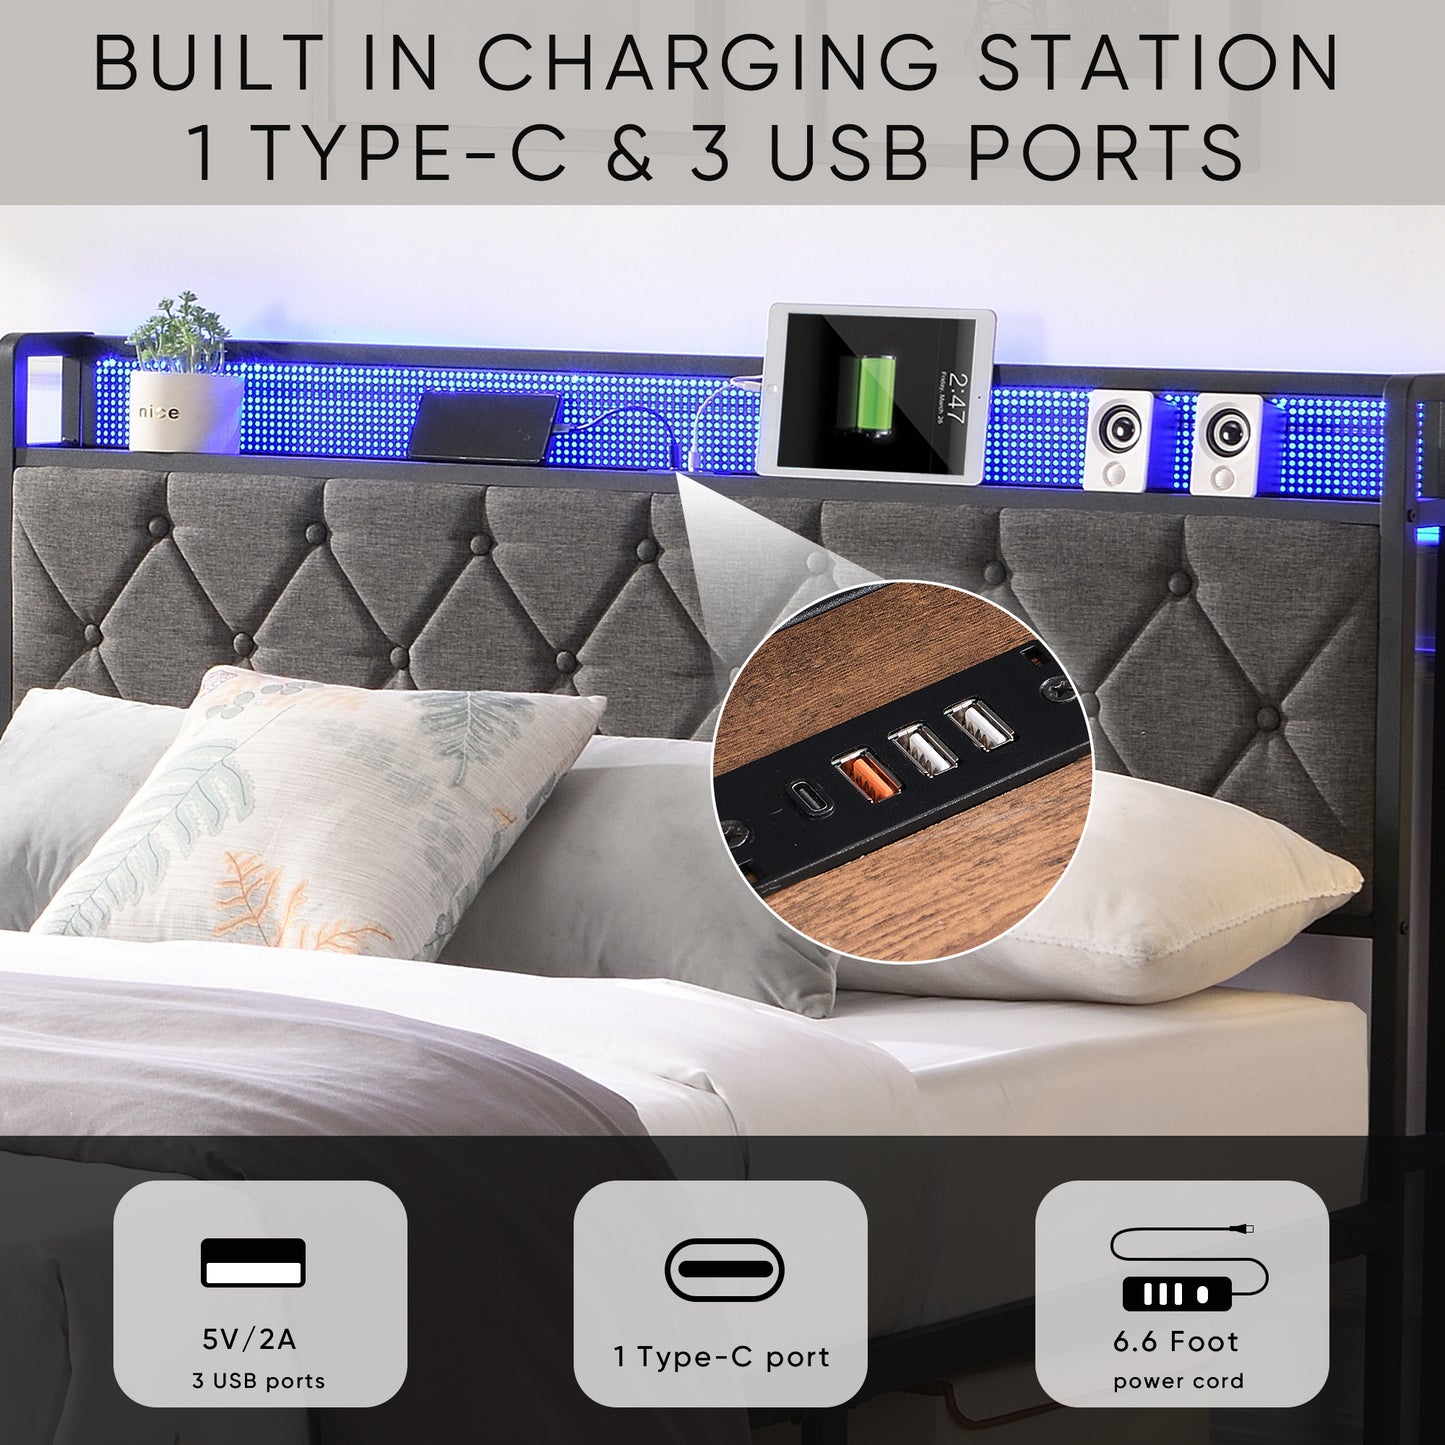 Full Bed Frame with Storage Headboard, Charging Station and LED Lights